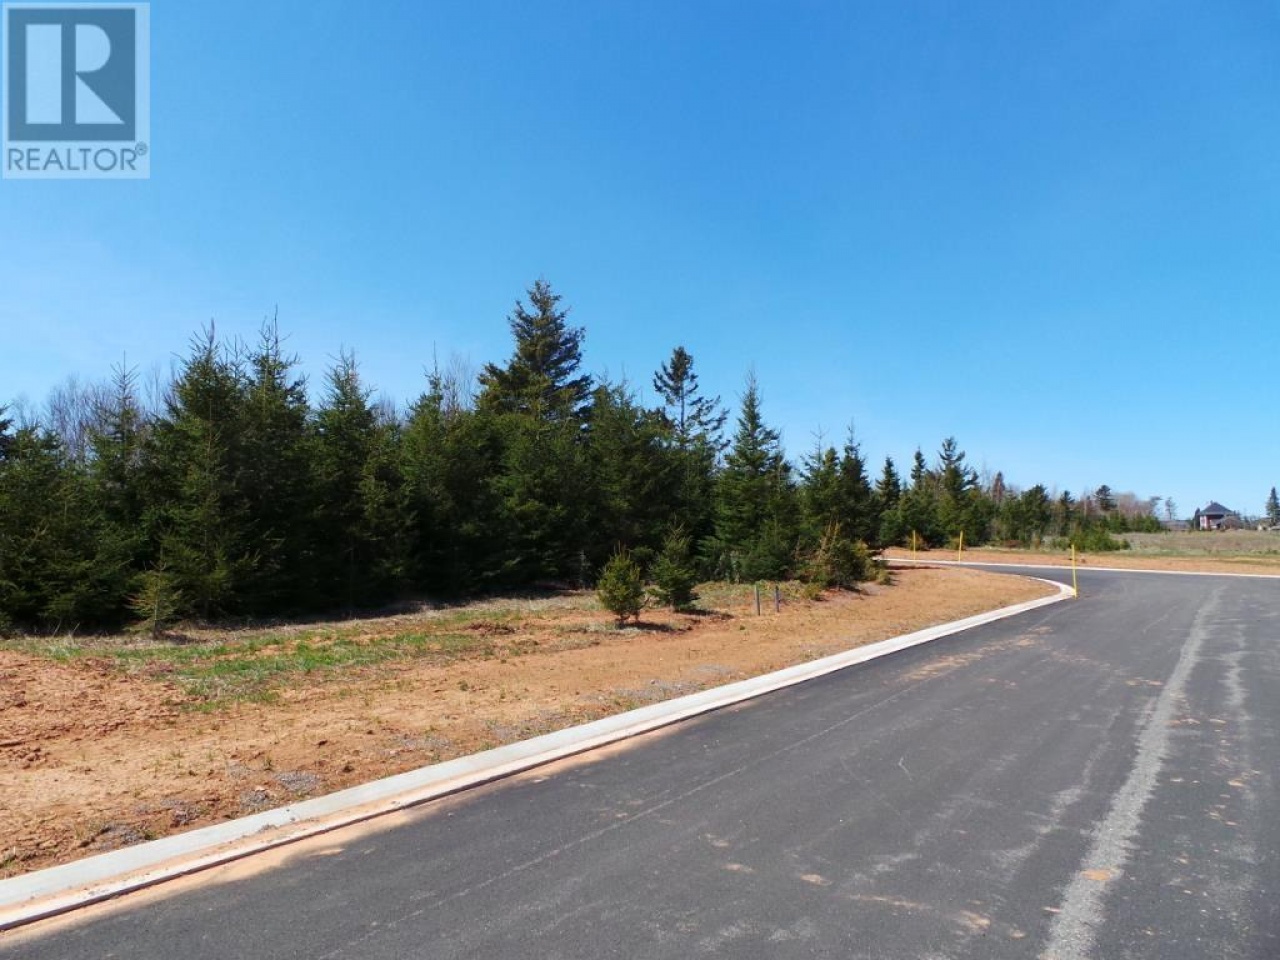 Lot 20-2 Waterview HeightsLot 20-2 Waterview Heights, Summerside, Prince Edward Island C1N6H5, ,Vacant Land,For Sale,Lot 20-2 Waterview Heights,202111405